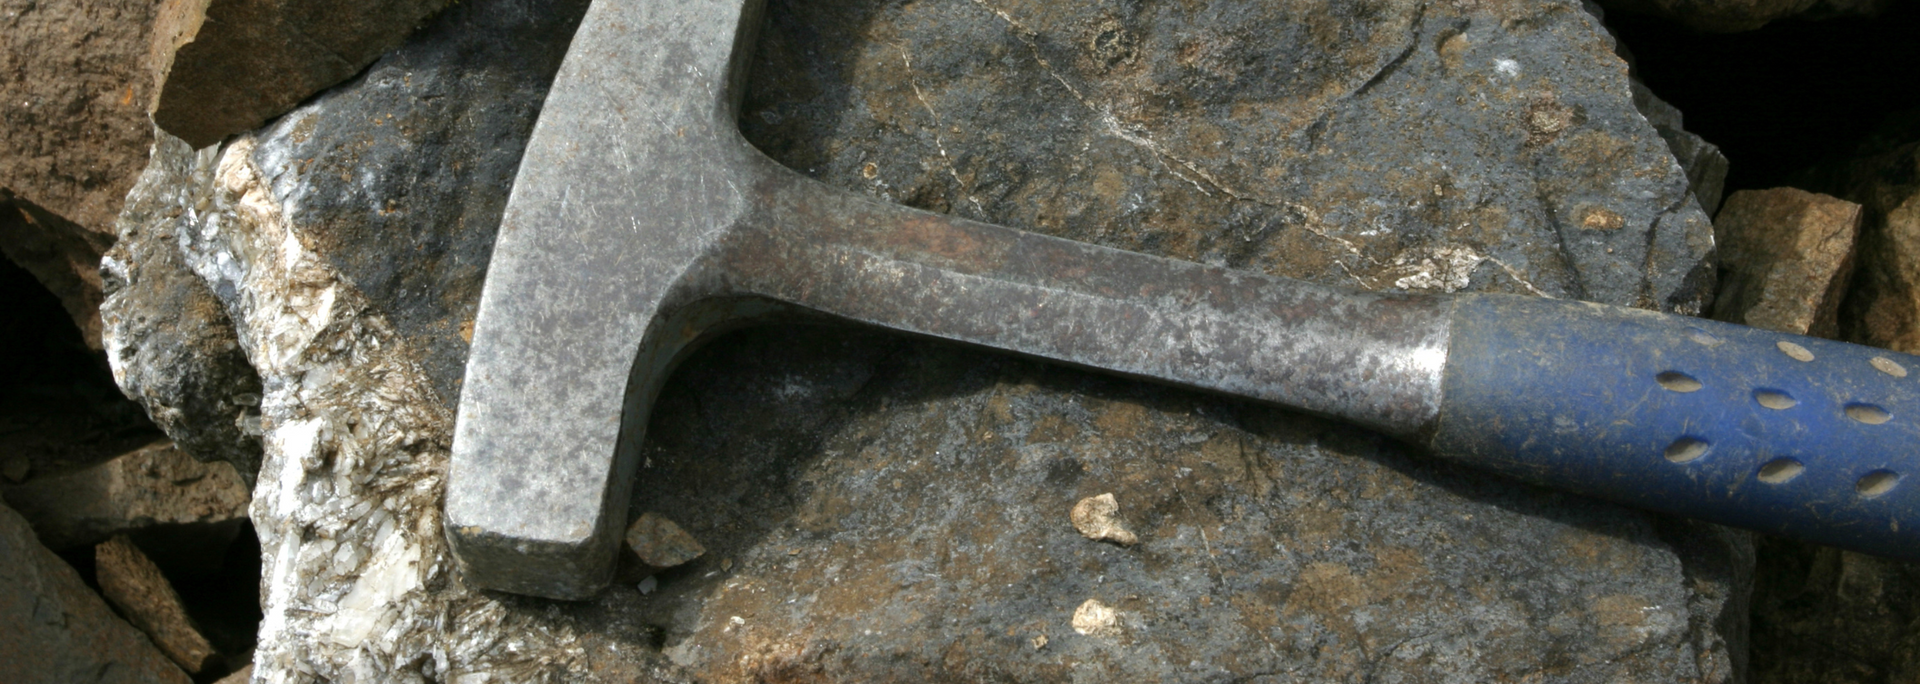 Picture of a rock and a hammer.